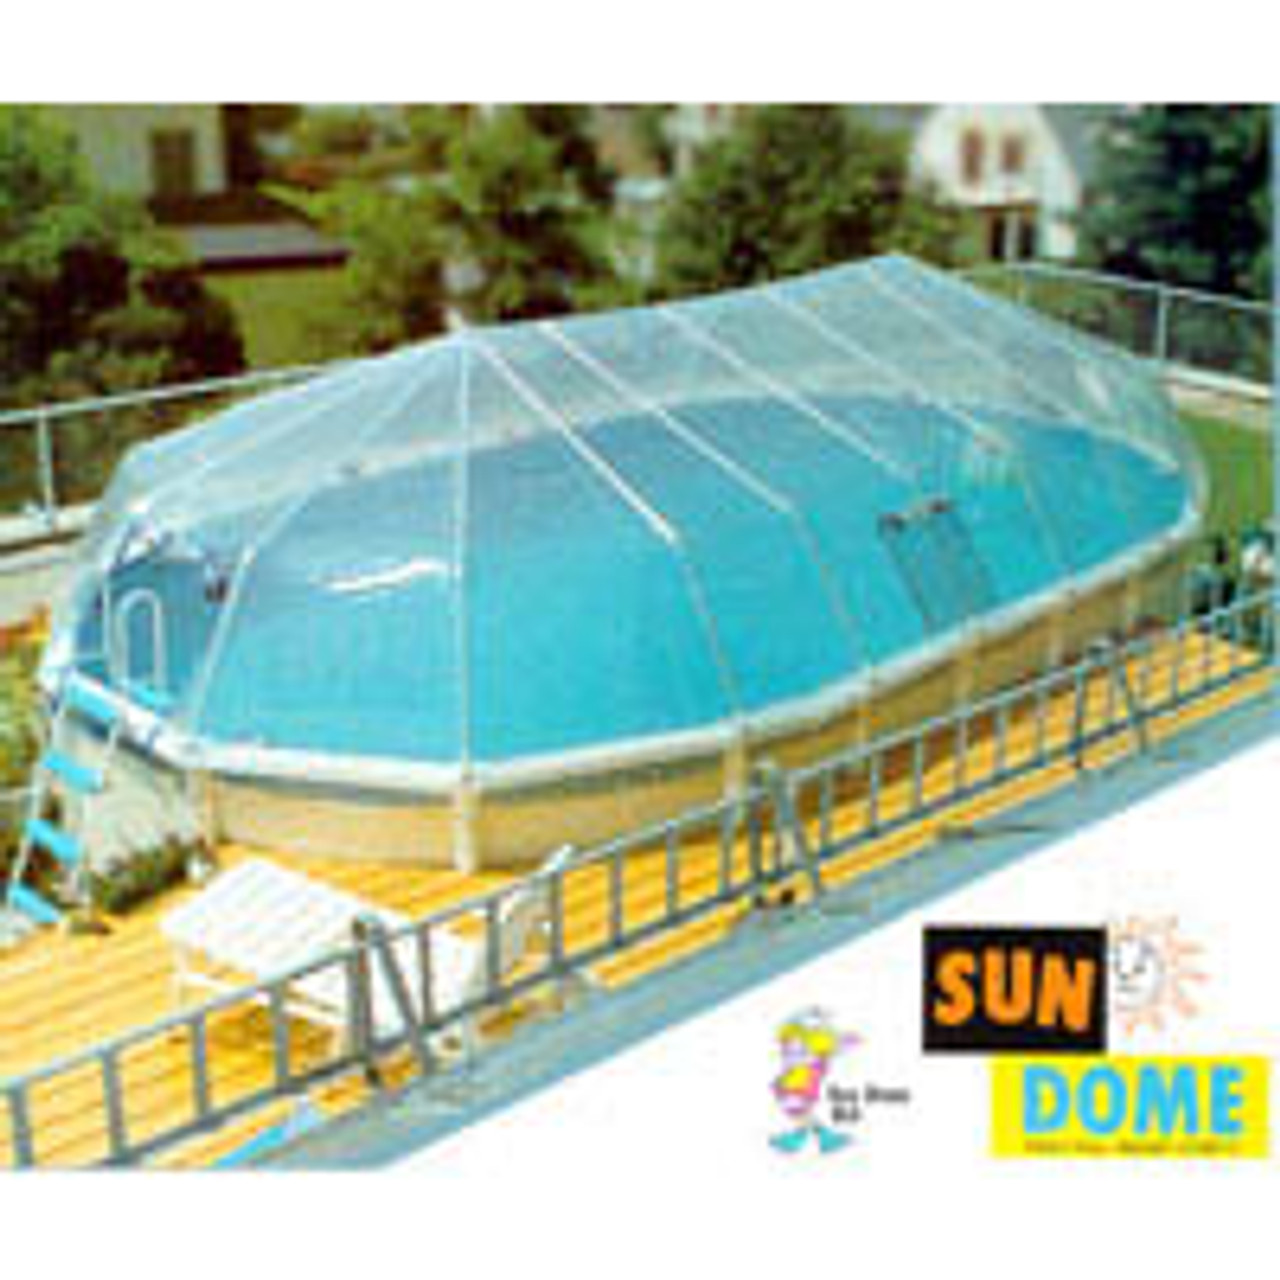 https://cdn11.bigcommerce.com/s-2me4y5fzhp/images/stencil/1280x1280/products/2540/3424/fabrico-sun-dome-for-12-x-24-oval-above-ground-pool-10__77918.1611338057.jpg?c=1